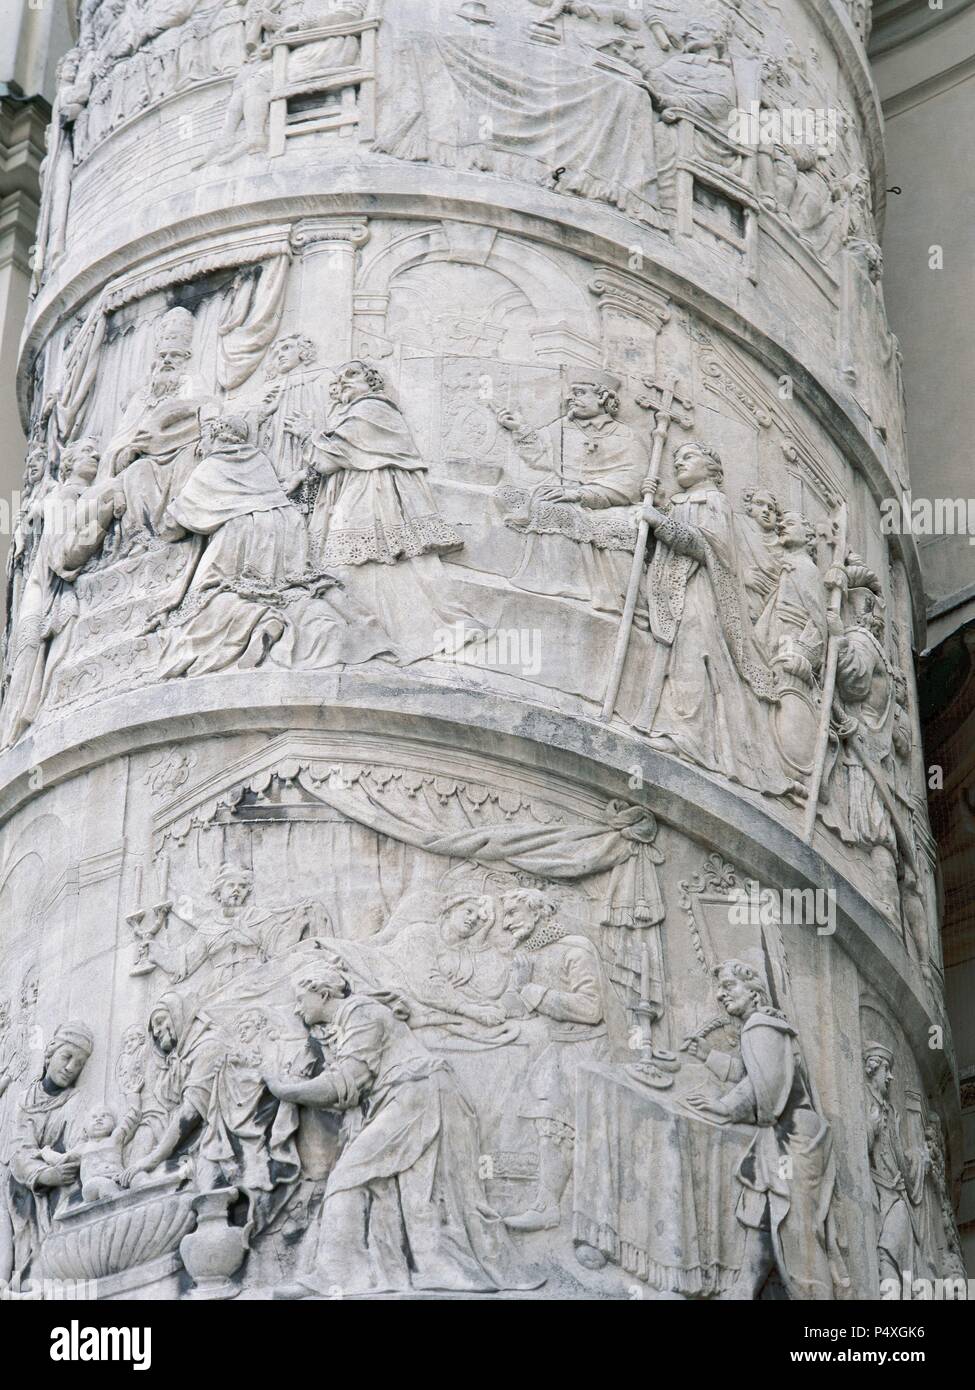 Baroque Art. Karlskirche or Church of St. Charles Borromeo (1716-1737). Column on the left side of the church, decorated with spirals. Detail depicting scenes from the life of St. Charles Borromeo. Vienna. Austria. Stock Photo